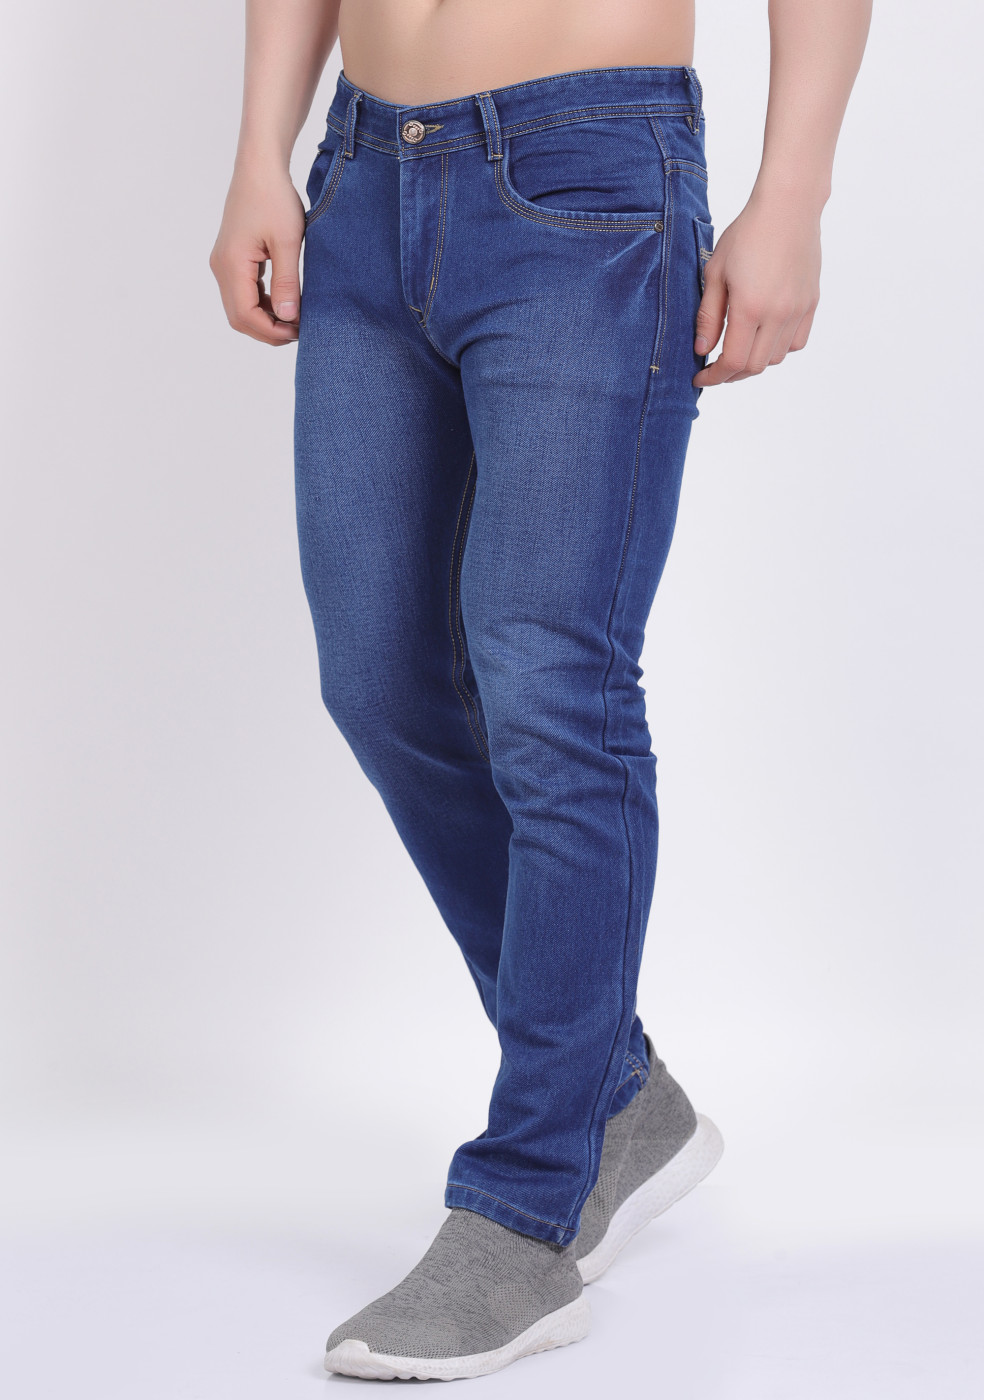 Buy online Stretchable Cotton Jeans For Men